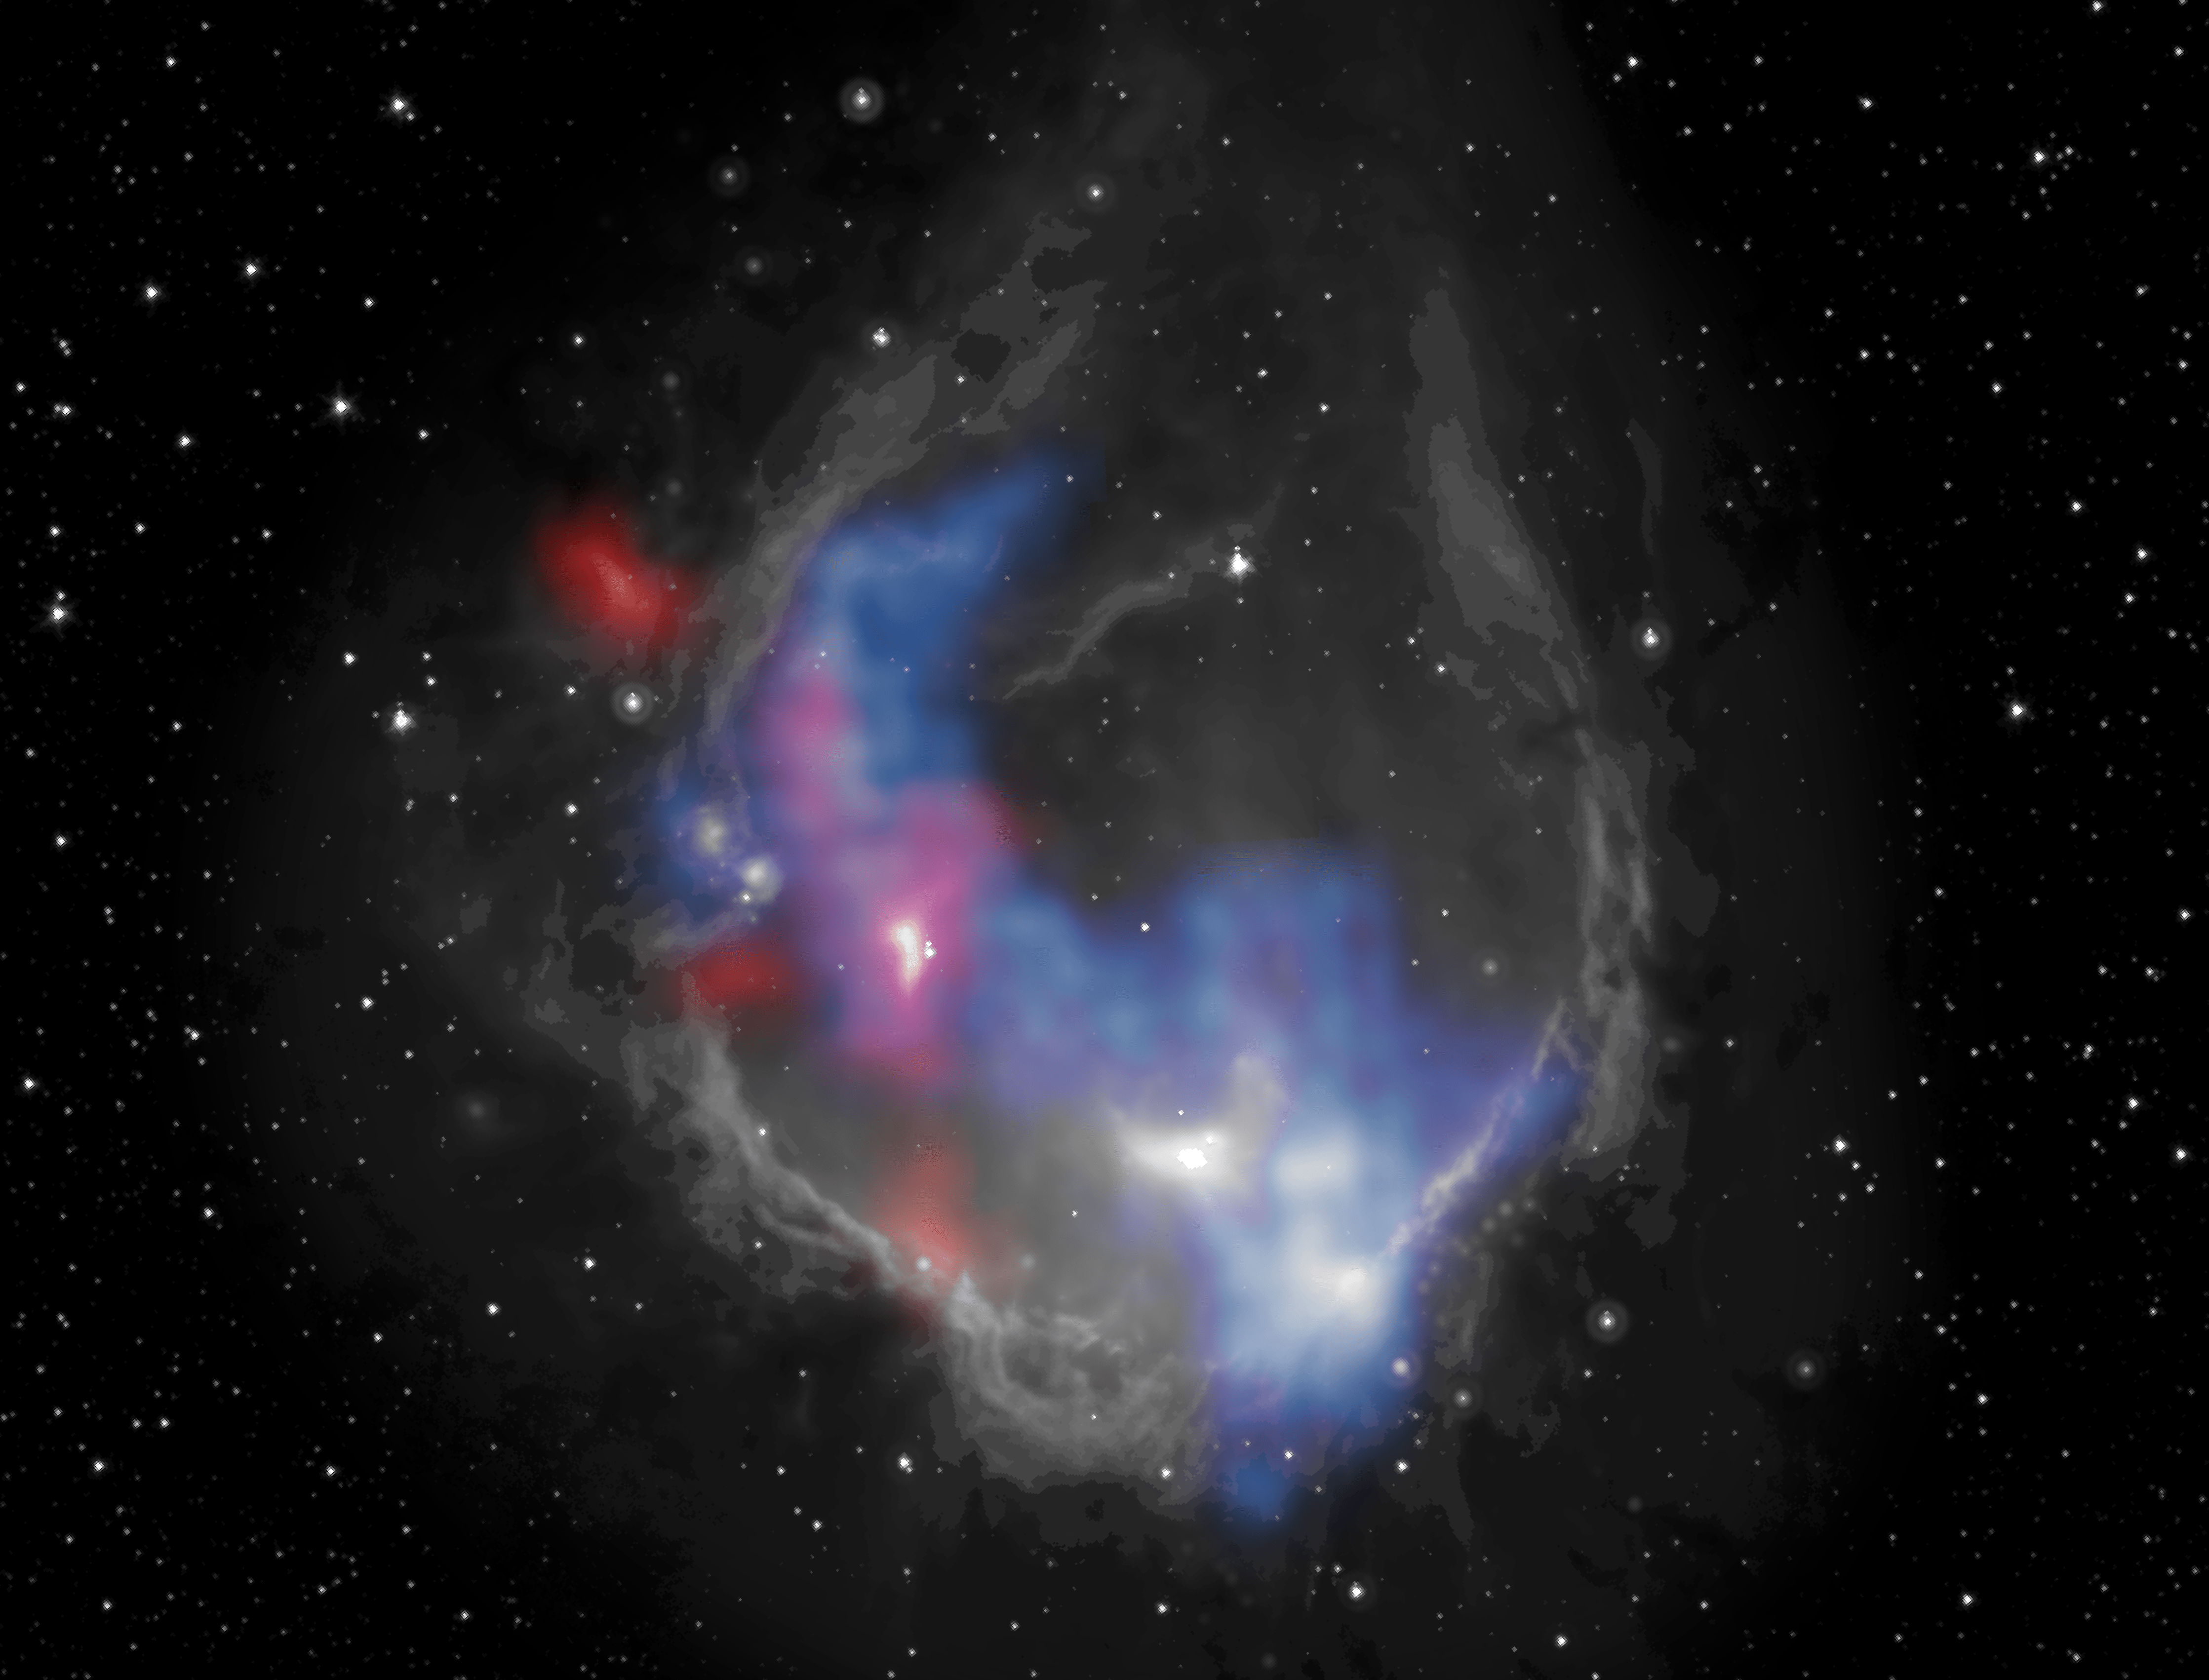 Composite image of the nebula RCW 120. By measuring the glowing gas (shown in red and blue), astronomers used SOFIA data to study the nebula's expansion speed and age.  (Image: NASA/JPL-Caltech/SOFIA)